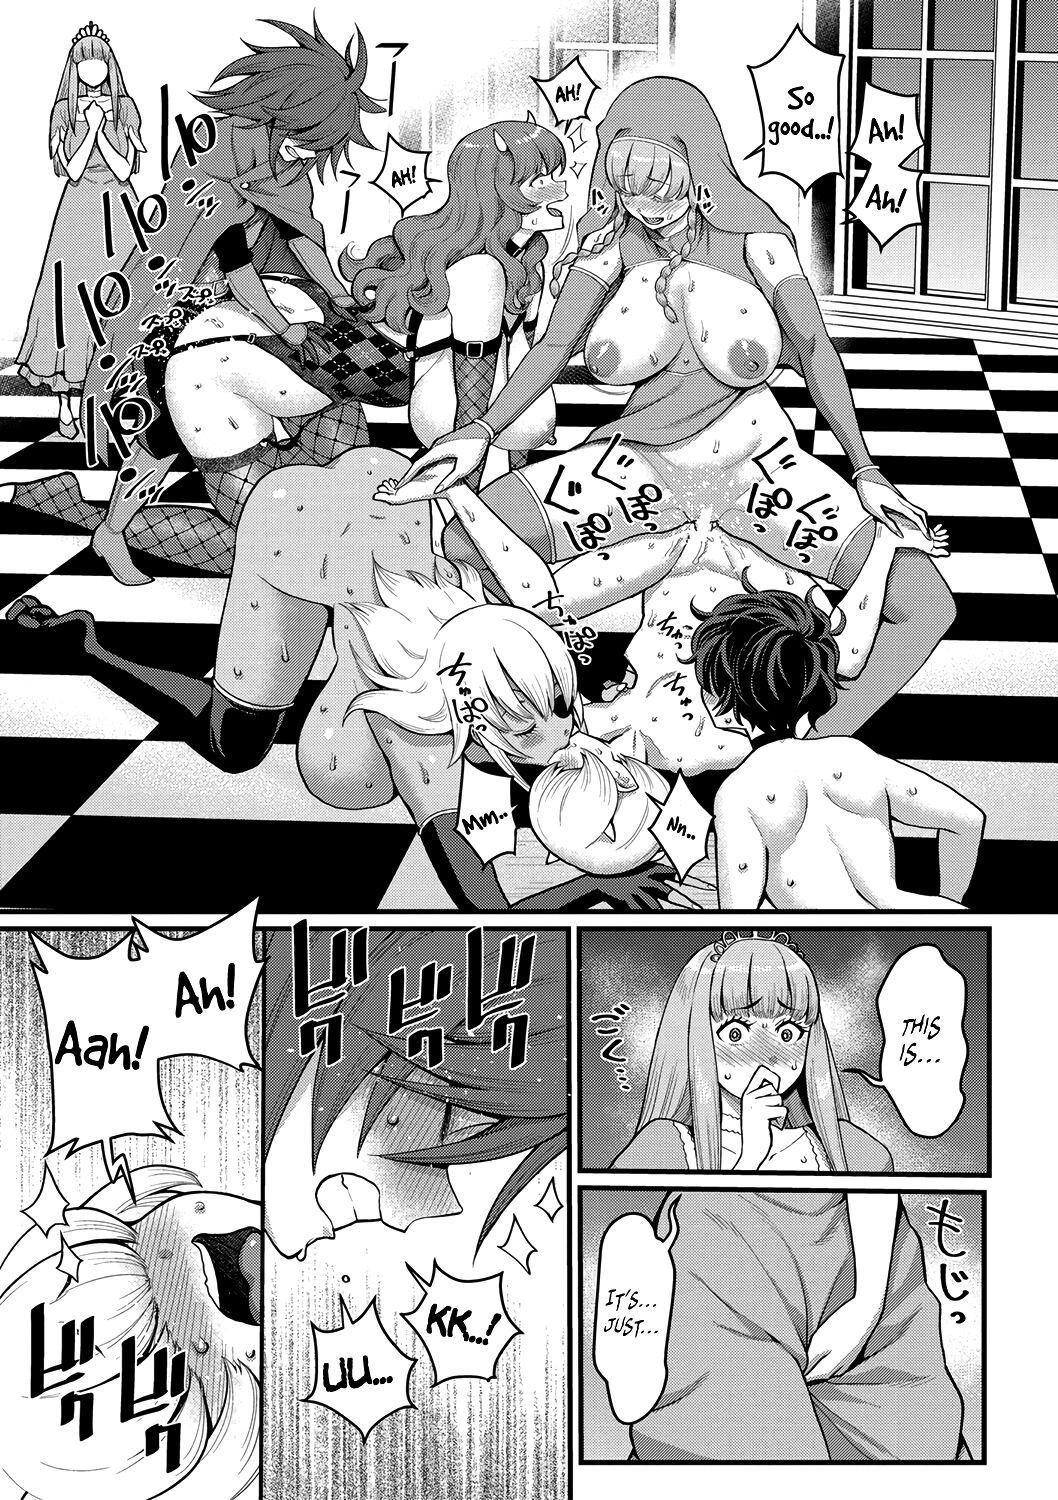 [Agata] ChinTrai Quest V ~Boku to Inma to Chijo-tachi to Orowareshi Himegimi~ | Dick Training Quest V ~Me, The Succubus, Some Perverted Women, and a Cursed Princess~ [English] [Digital] 14